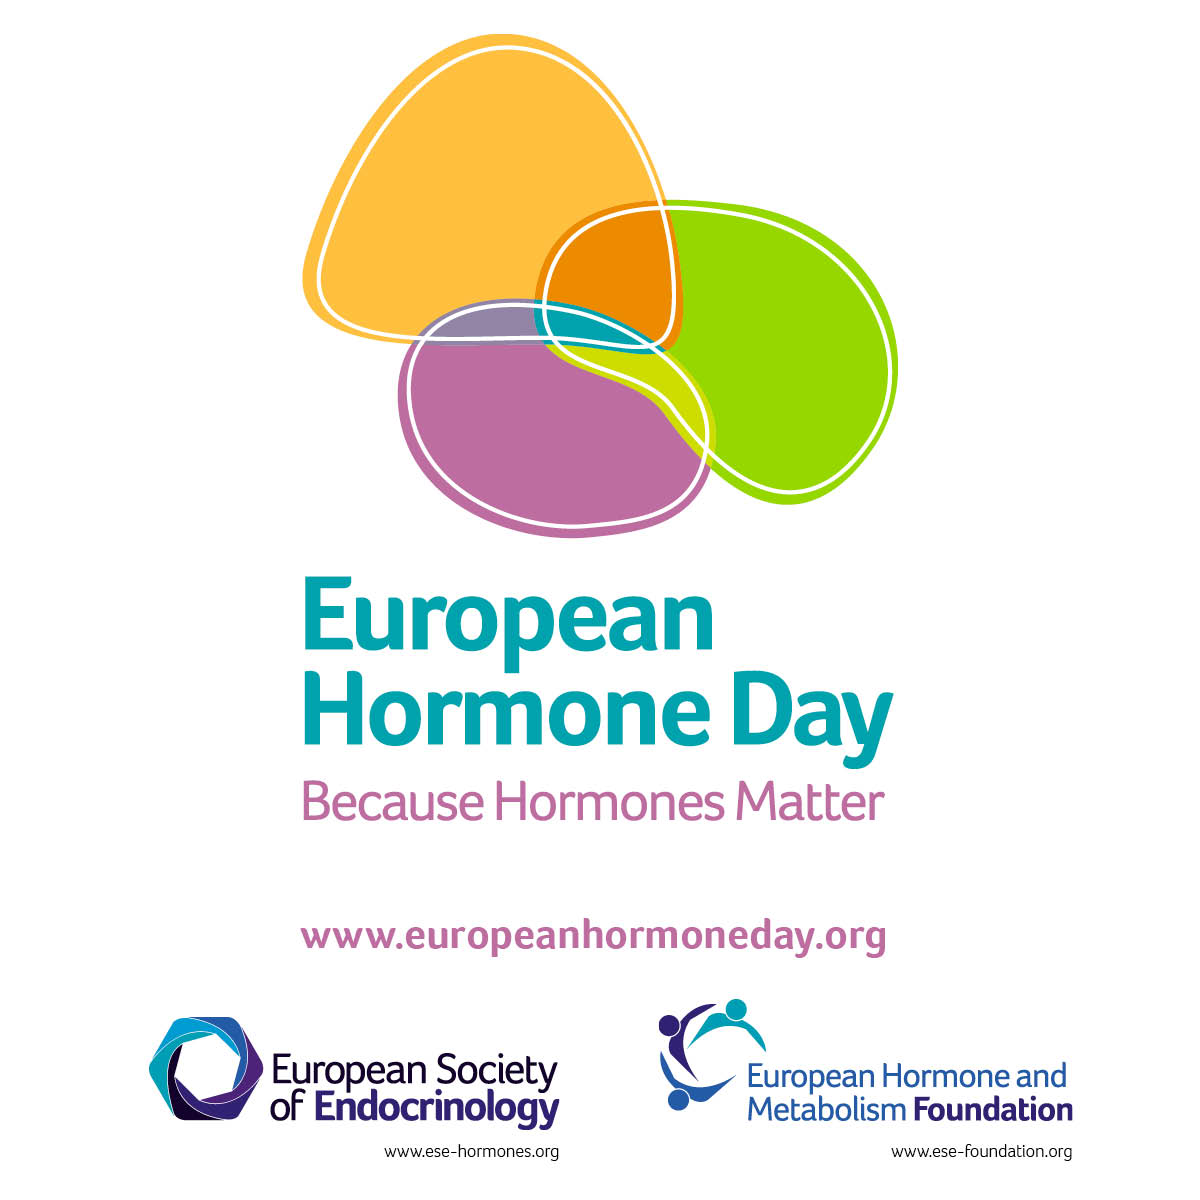 Promote endocrine health by raising awareness of #EuropeanHormoneDay 2024 on Wednesday 24 April!

This campaign aims to increase public awareness of the vital role hormones play in health and disease, #BecauseHormonesMatter.

Find out how to get involved: ow.ly/vqiy50Rj3q6